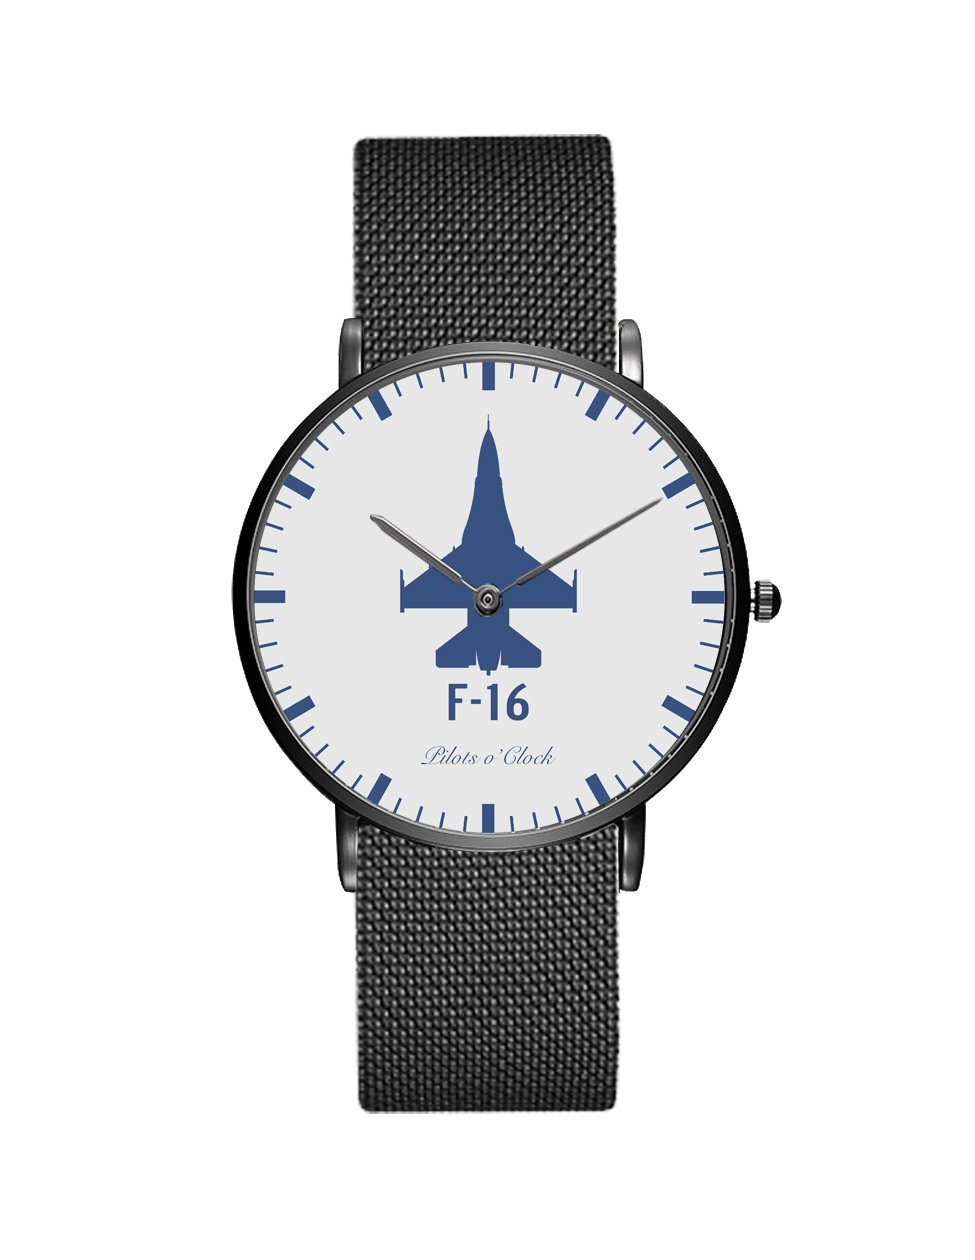 Fighting Falcon F16 Stainless Steel Strap Watches Pilot Eyes Store Black & Stainless Steel Strap 